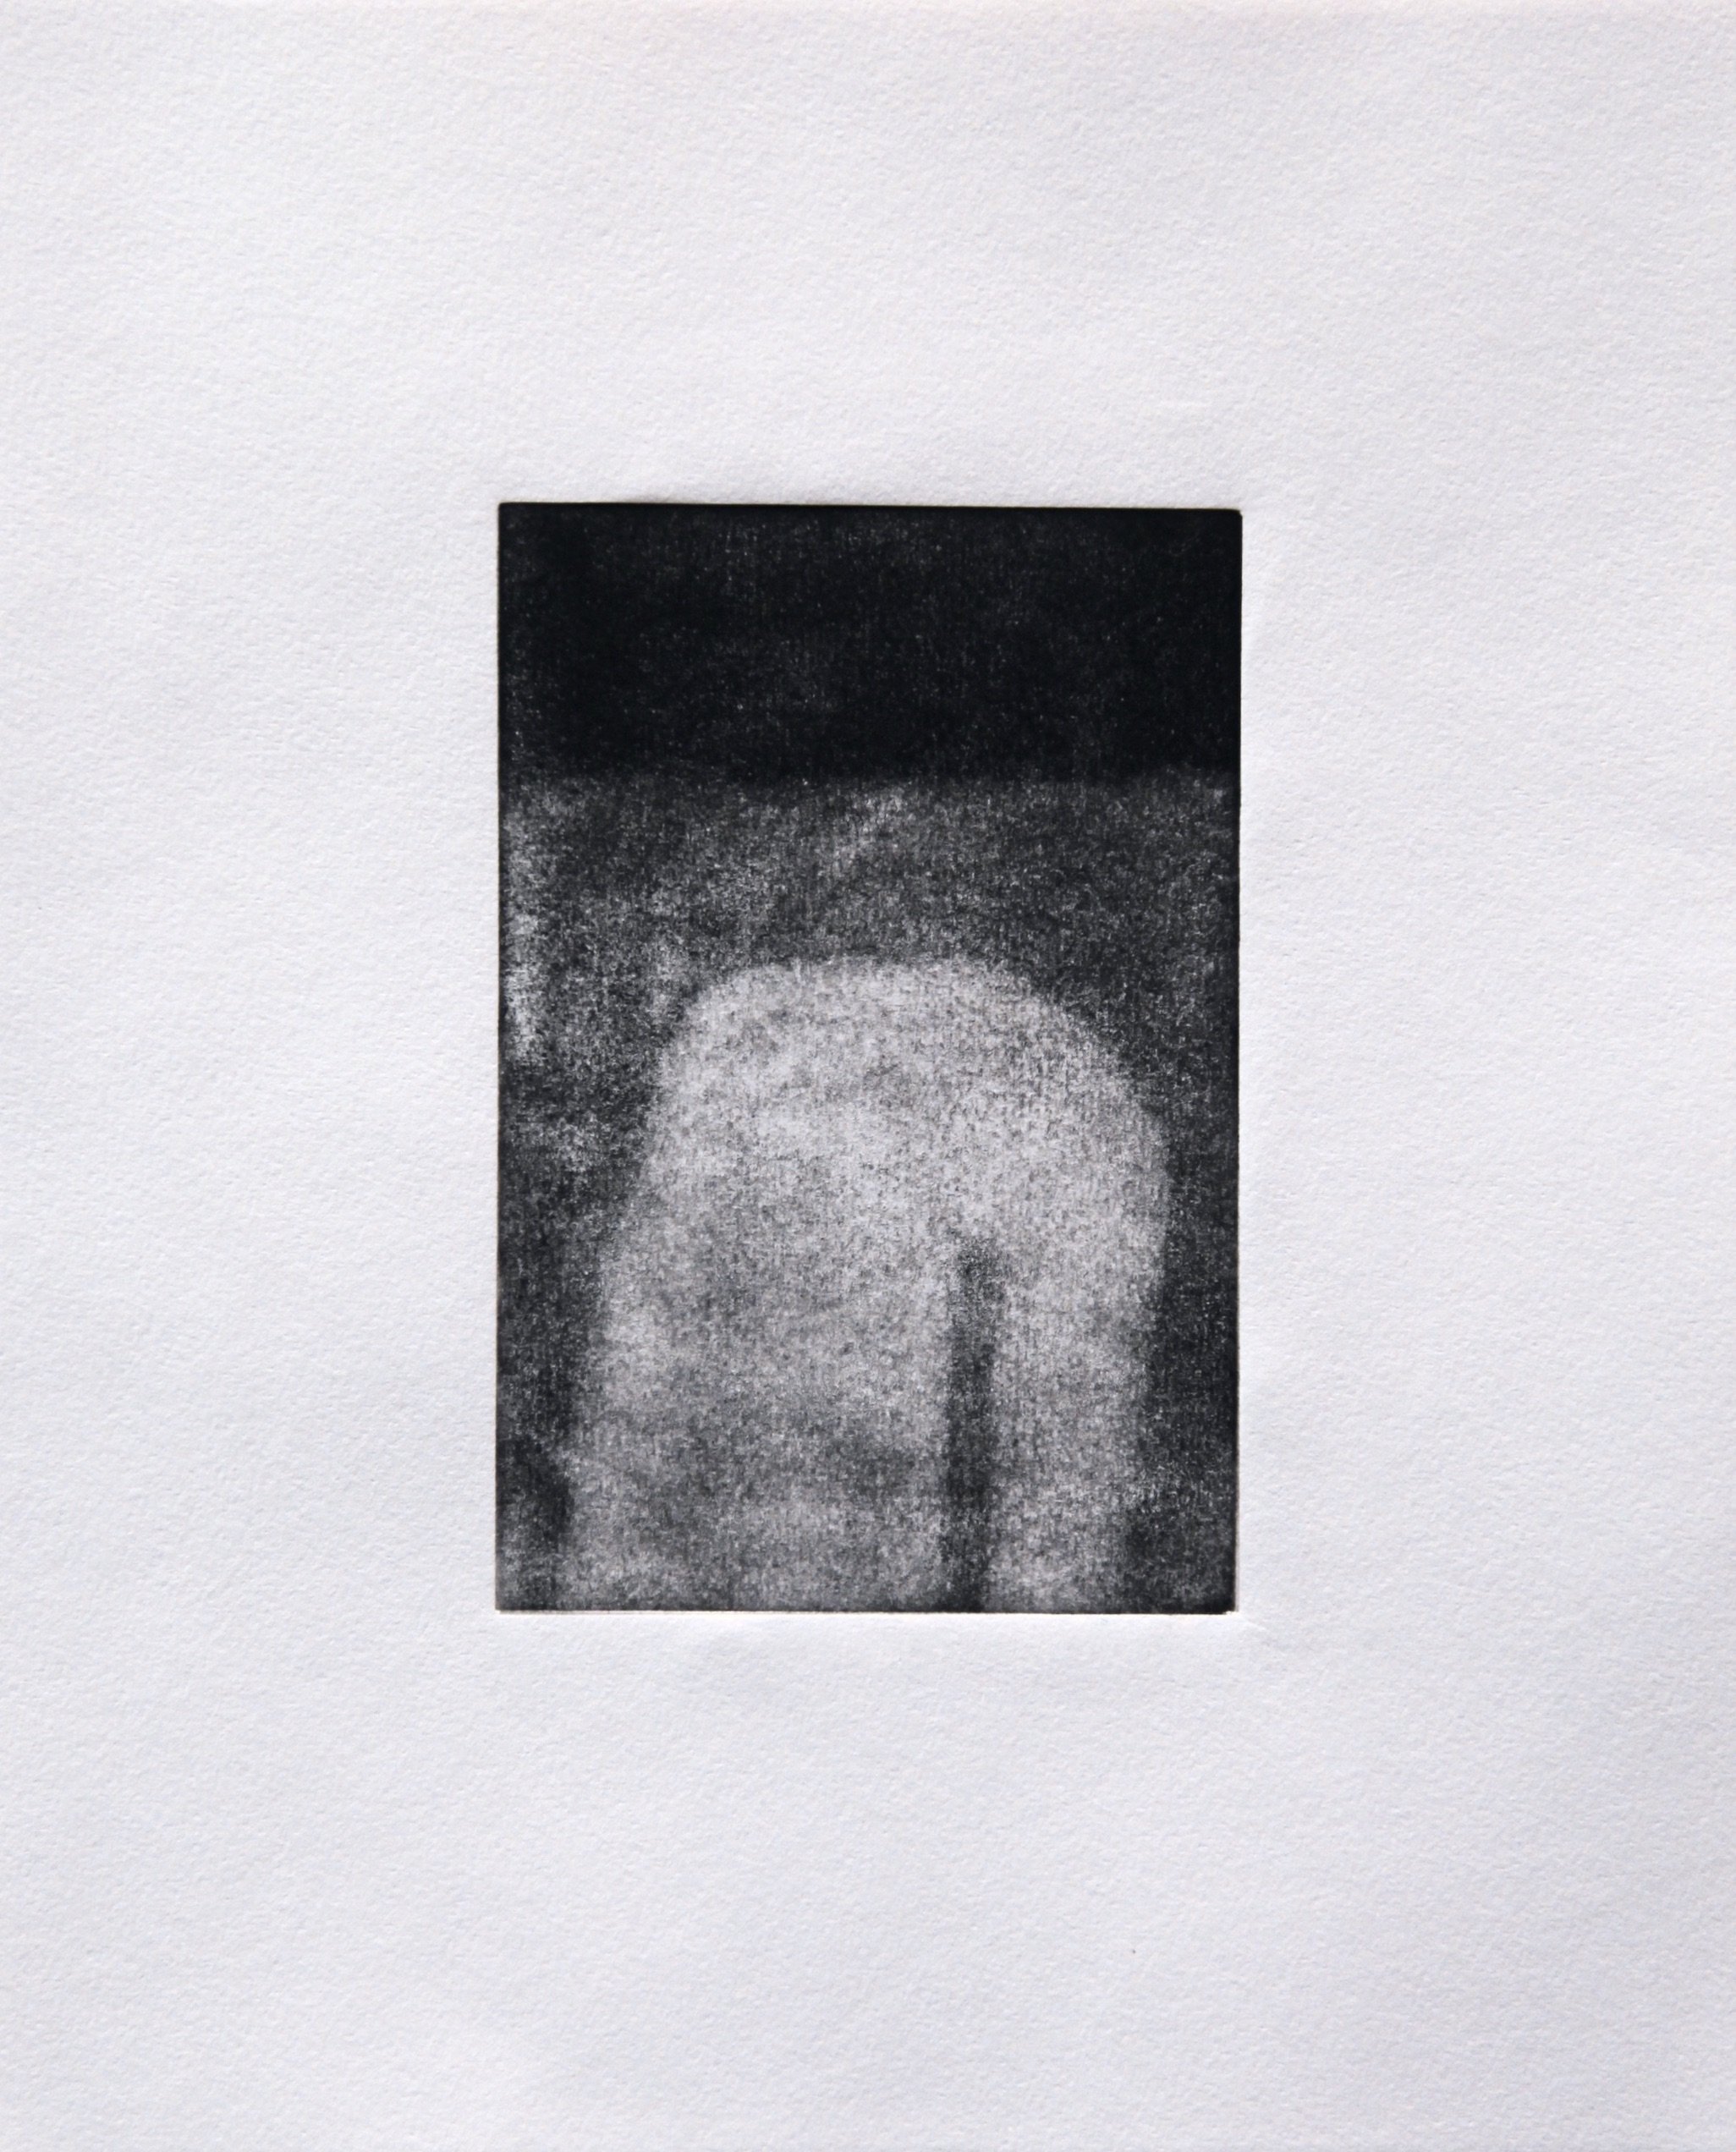   Folding,  2020, monotype on paper, plate size 15 x 10.5cm 